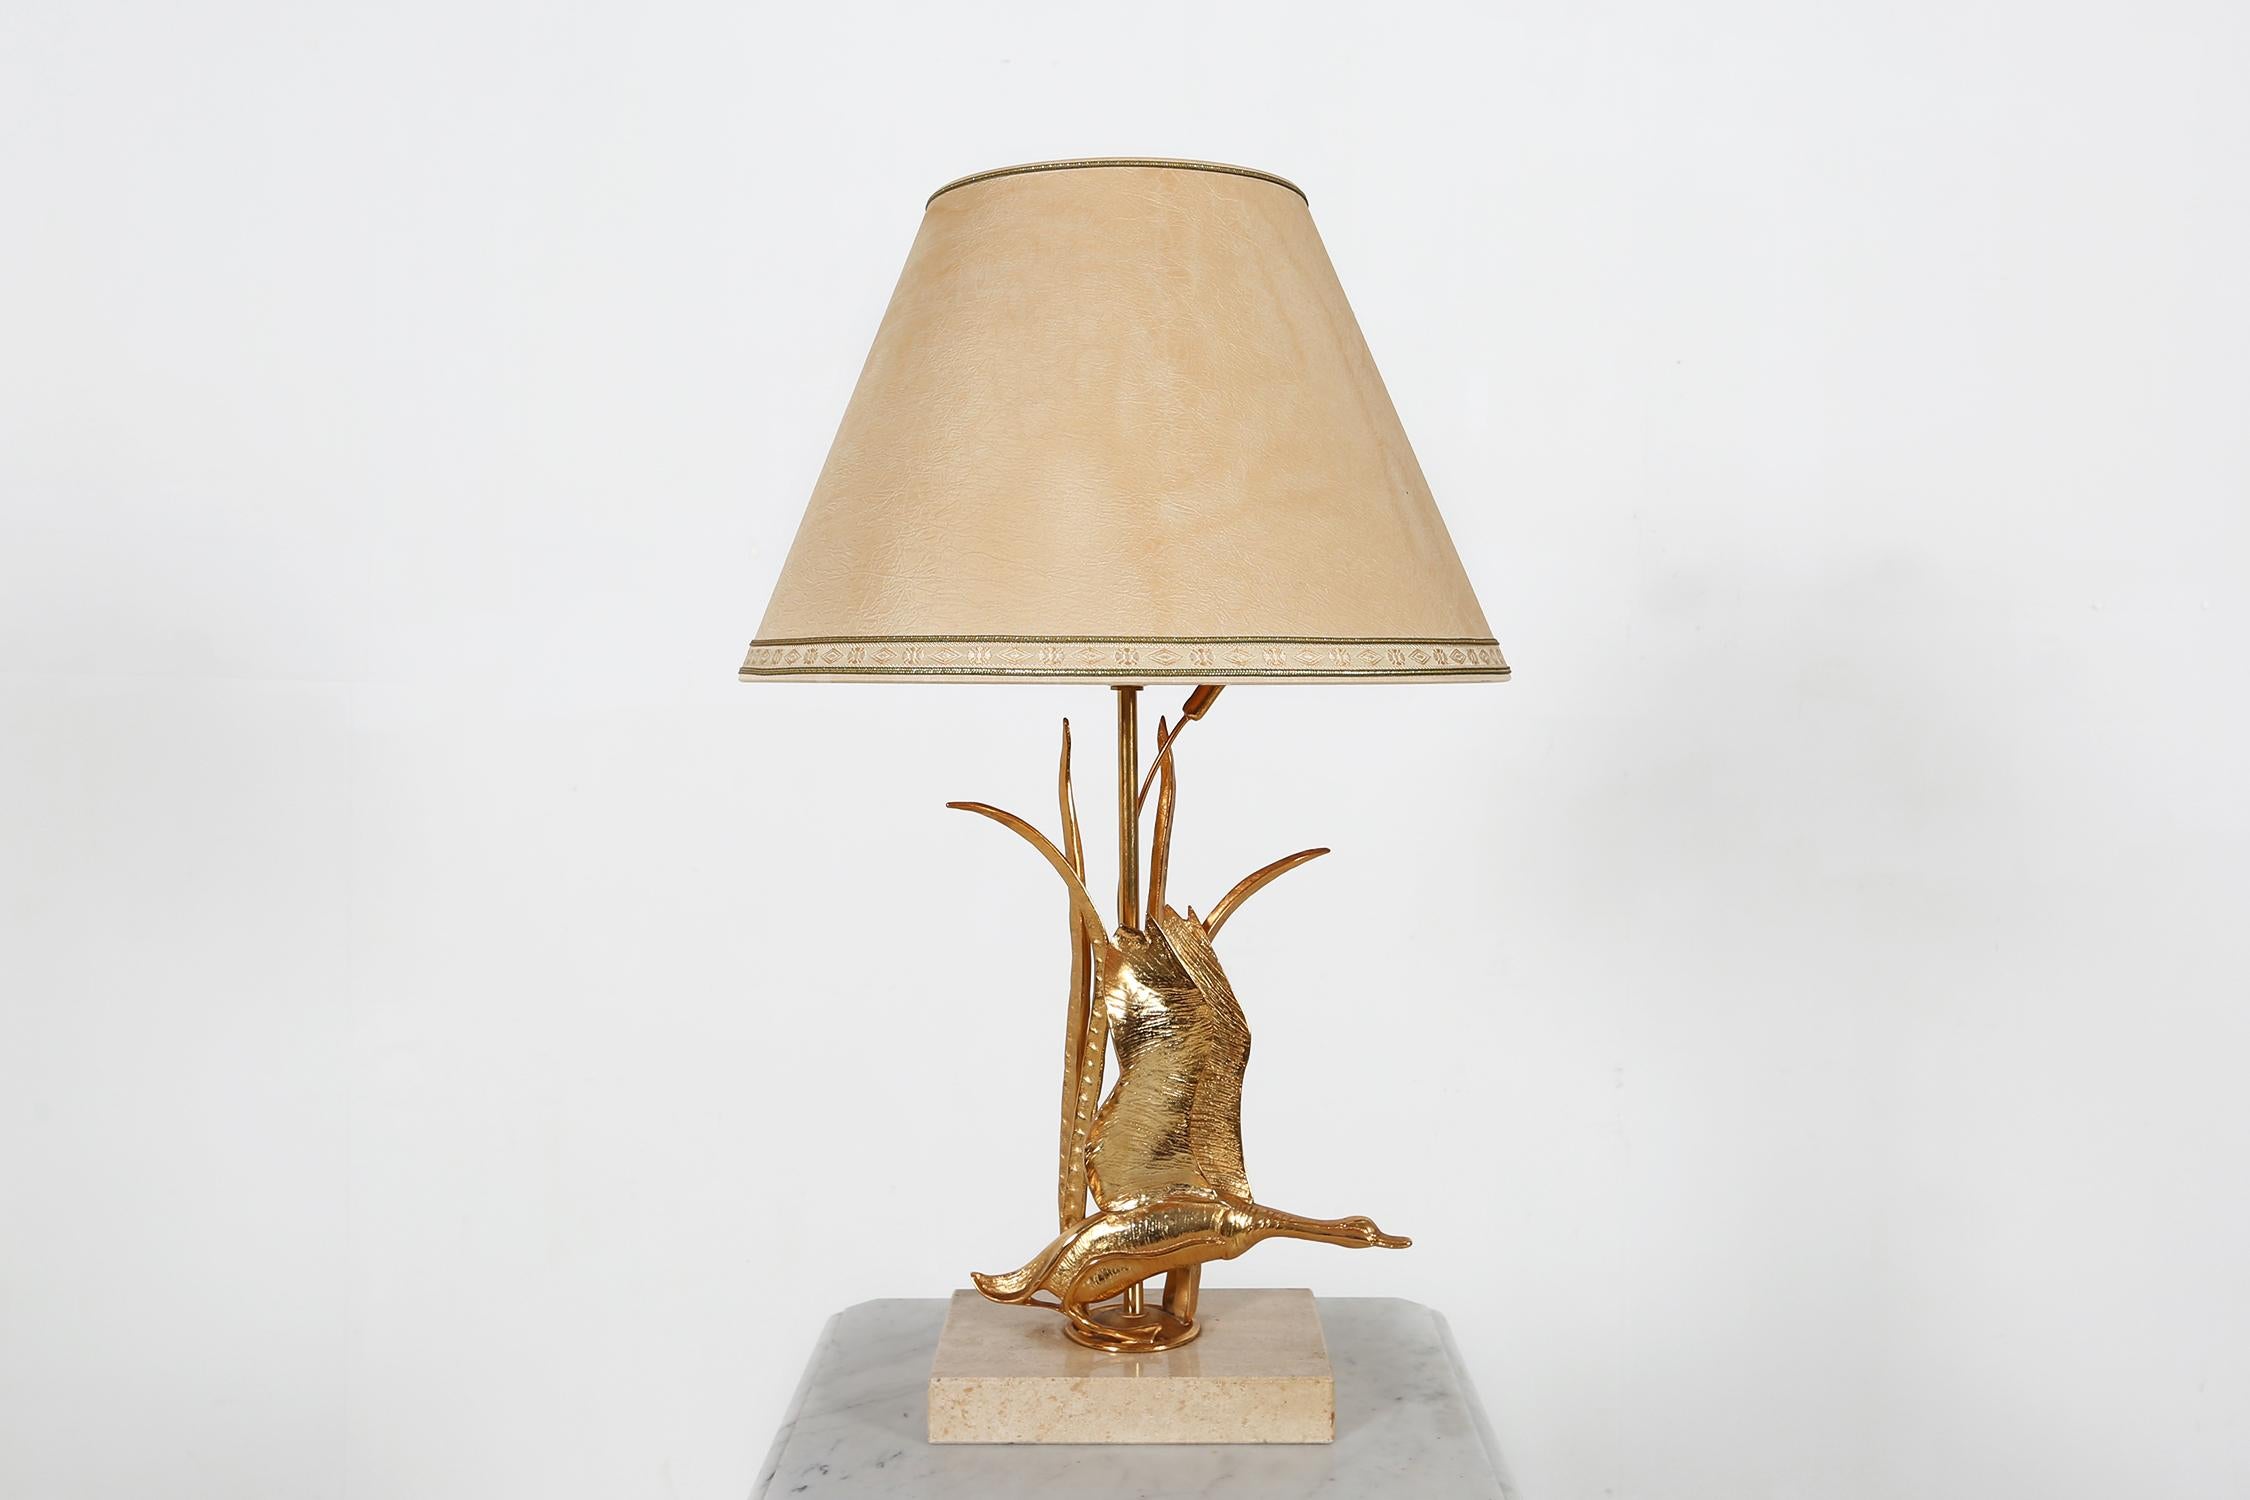 Vintage table lamp by Italian designer Lanciotto Galeotti.
Made of a travertine base and a brass swan. Beautiful details and high quality finish.